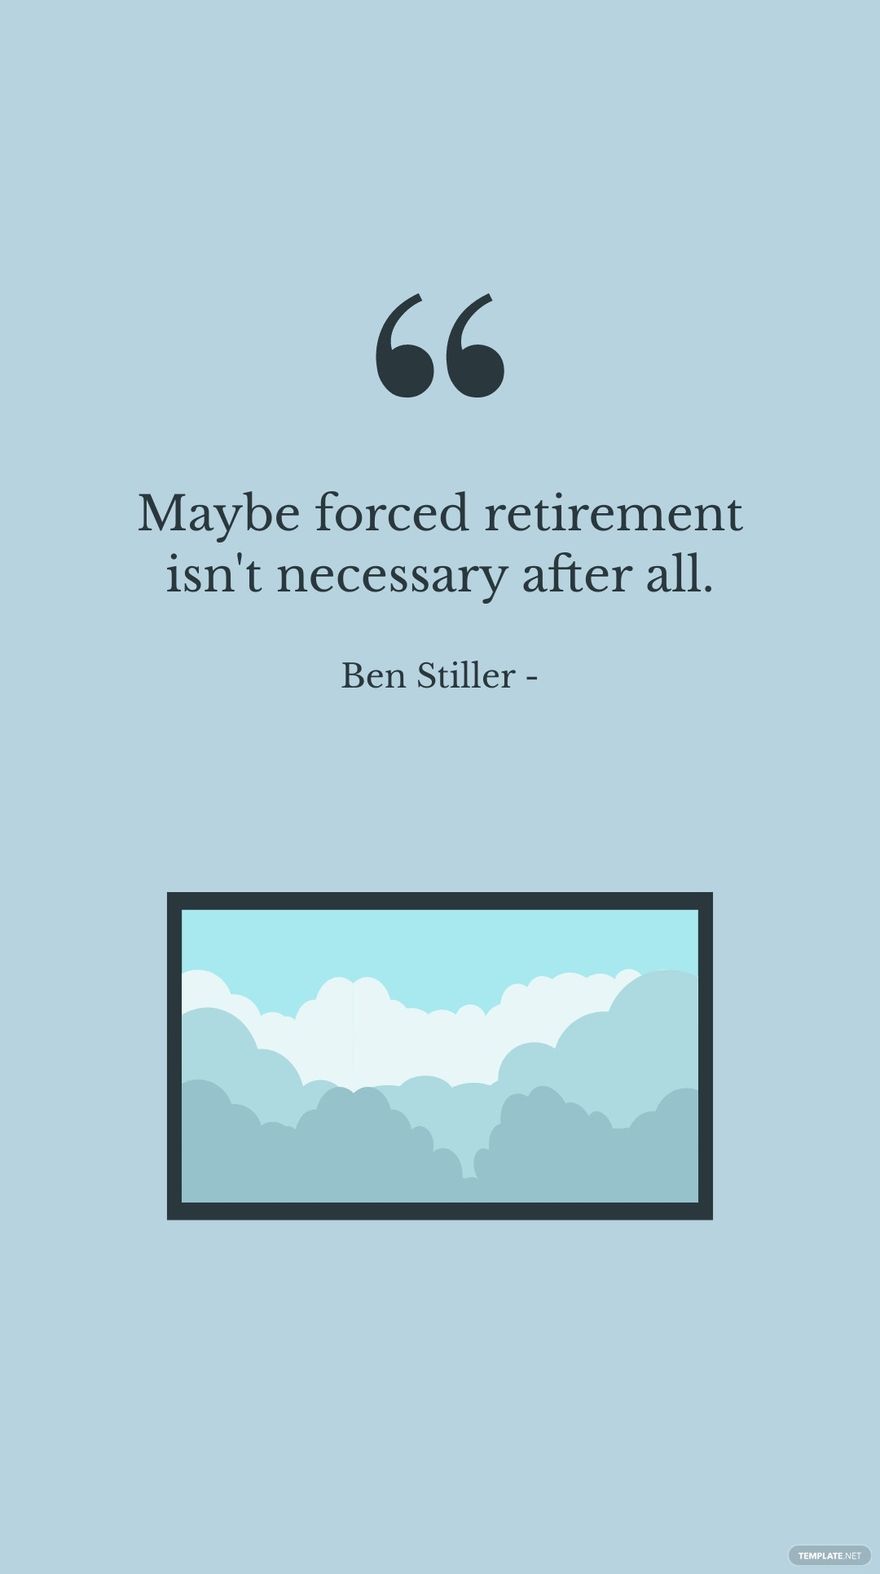 Free Ben Stiller - Maybe forced retirement isn't necessary after all.